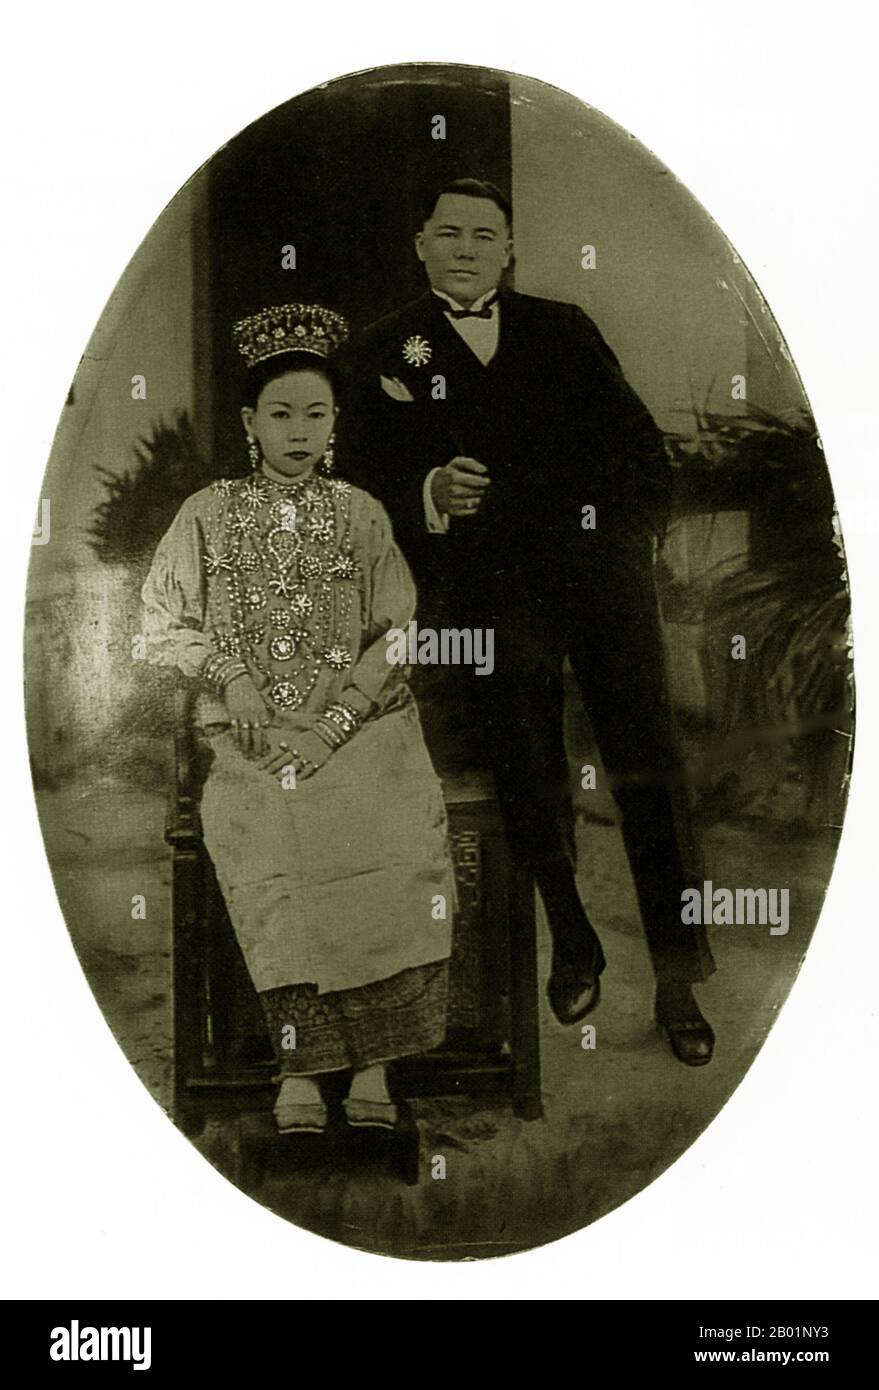 Malaysia/Singapore: A wealthy Peranakan couple, early 20th century.  Peranakan Chinese and Baba-Nyonya are terms used for the descendants of late 15th and 16th-century Chinese immigrants to the Malay-Indonesian archipelago of Nusantara during the Colonial era.  Members of this community in Malaysia identify themselves as 'Nyonya-Baba' or 'Baba-Nyonya'. Nyonya is the term for the females and Baba for males. It applies especially to the ethnic Chinese populations of the British Straits Settlements of Malaya and the Dutch-controlled island of Java and other locations. Stock Photo